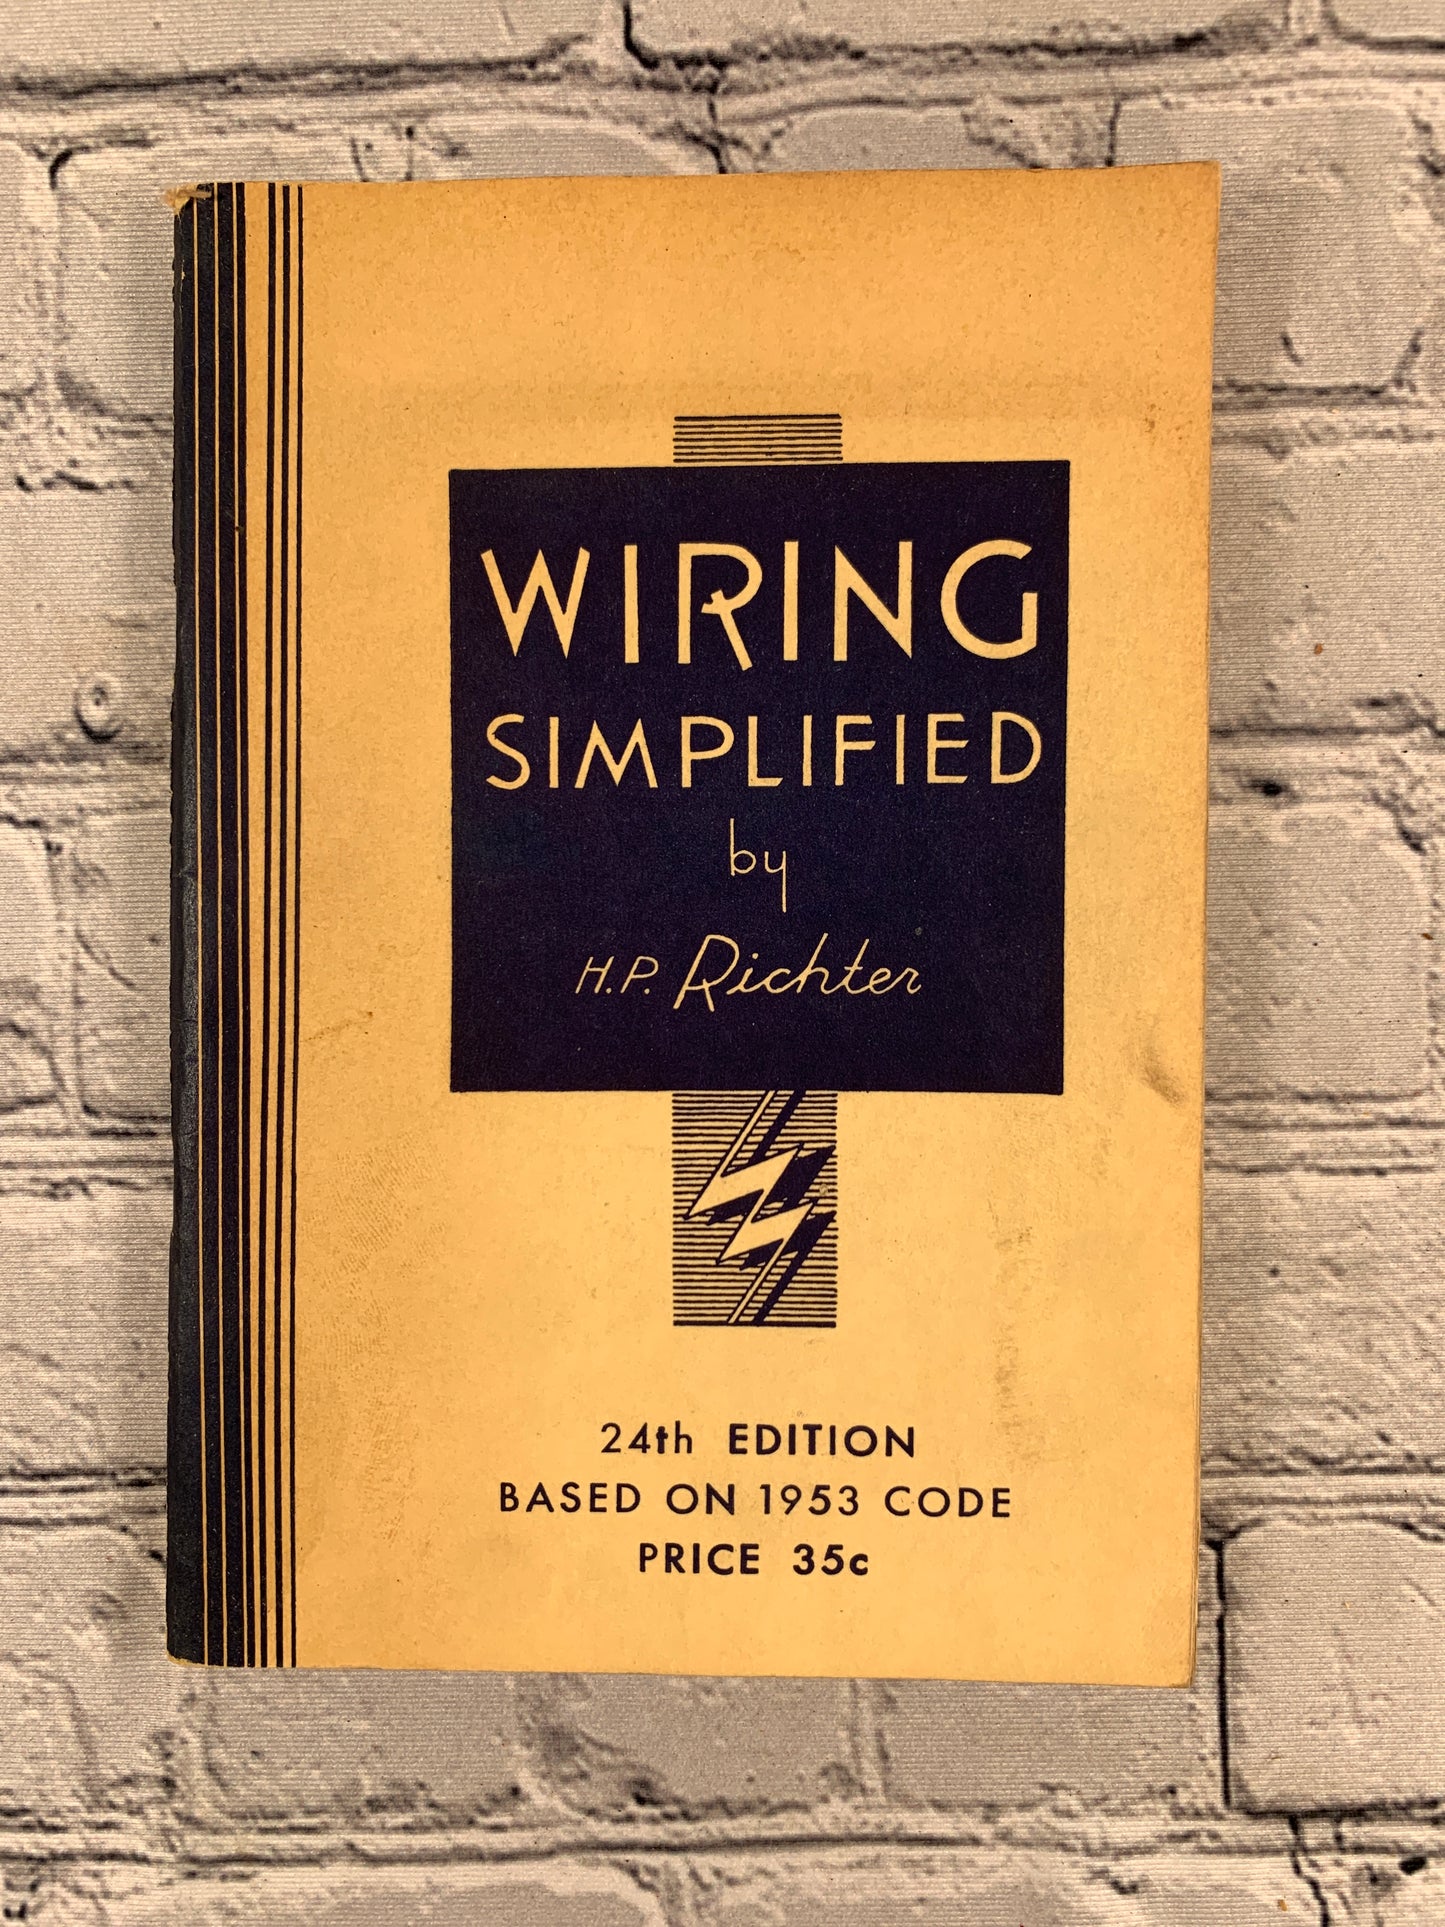 Wiring Simplified by H.P. Richter [1953]